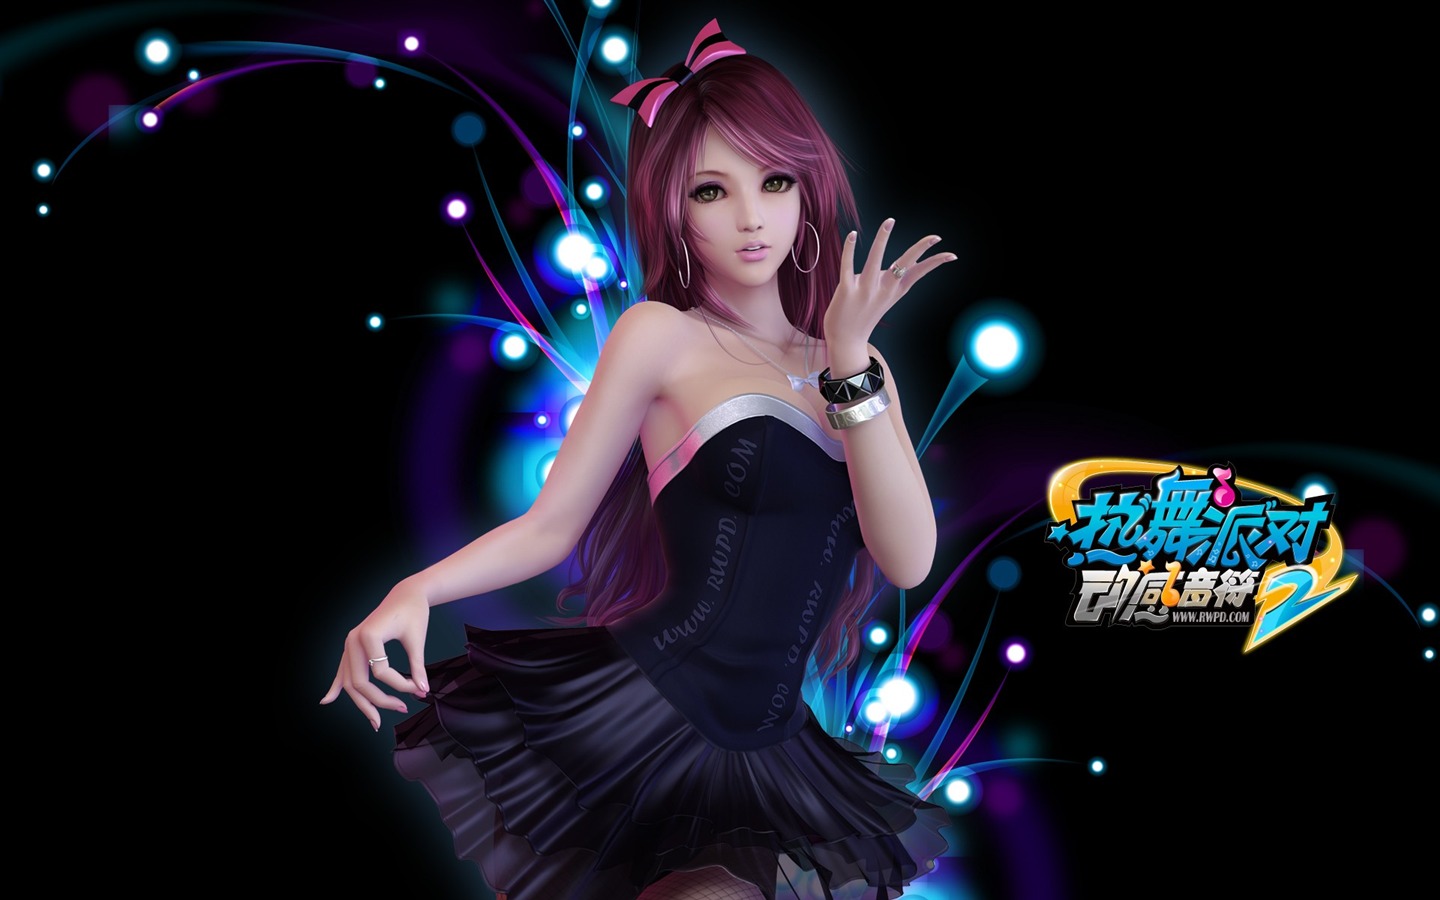 Online game Hot Dance Party II official wallpapers #31 - 1440x900